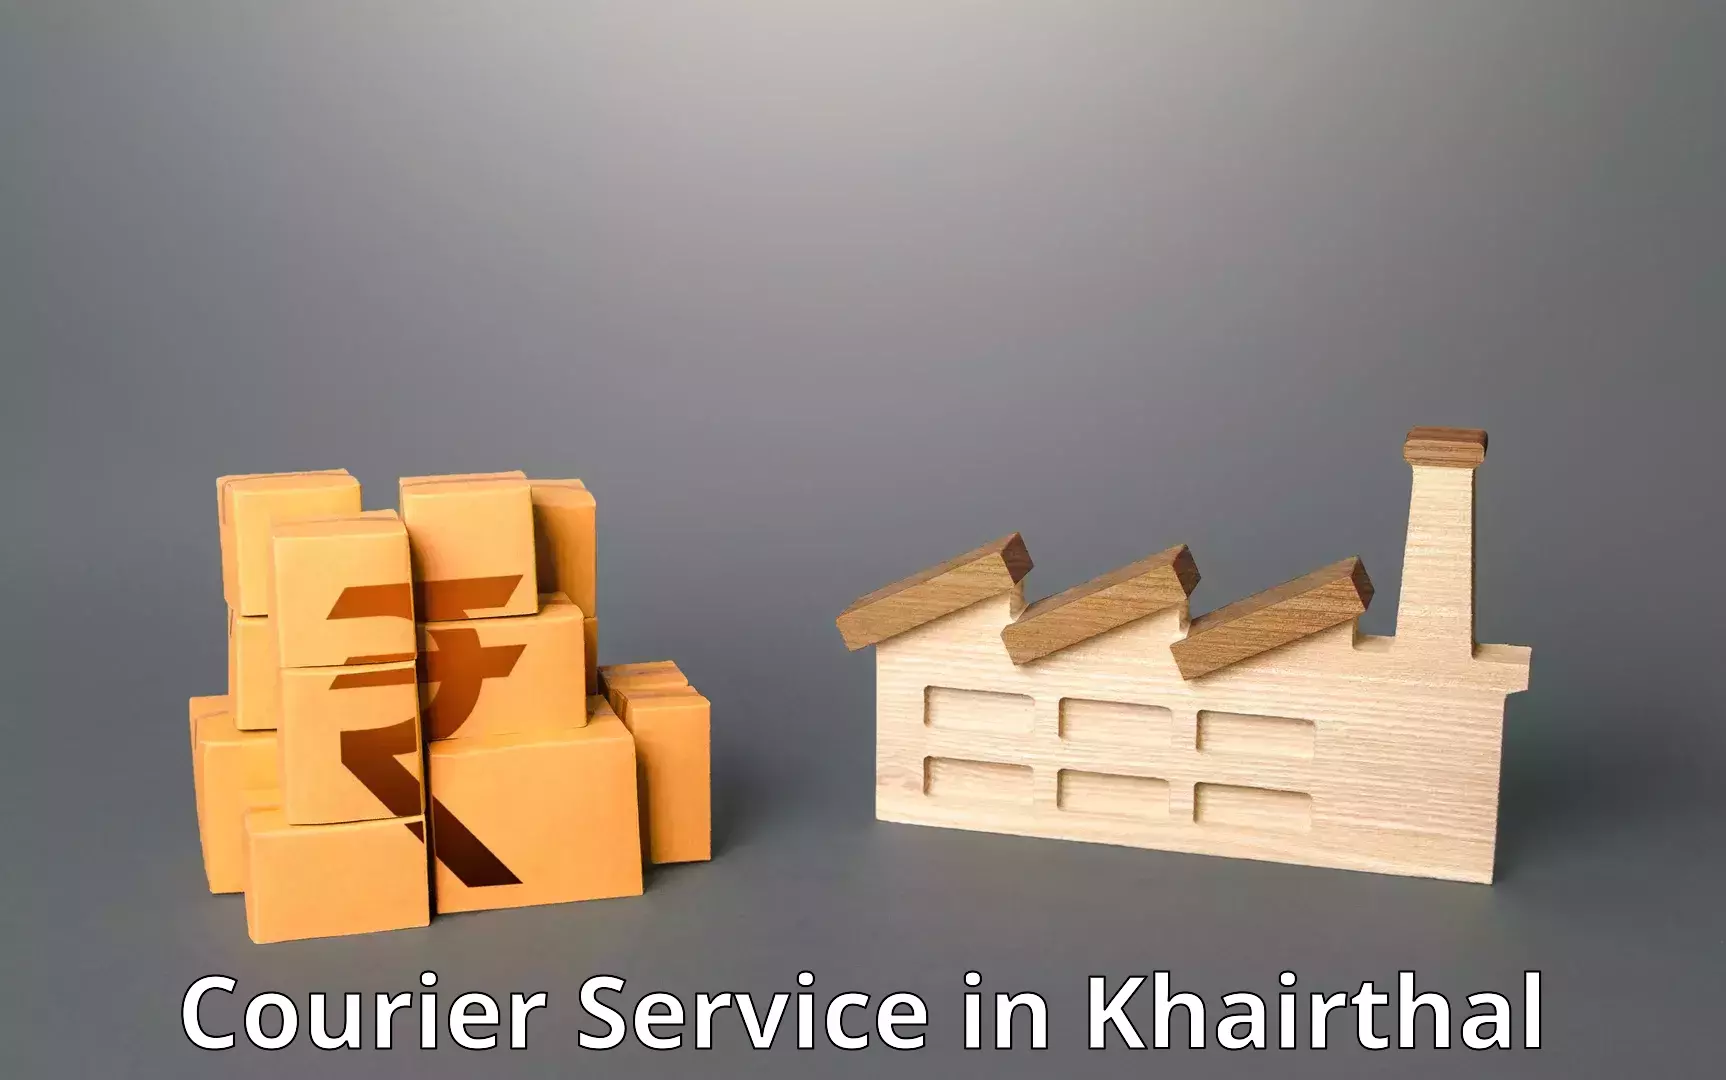 Next day courier in Khairthal